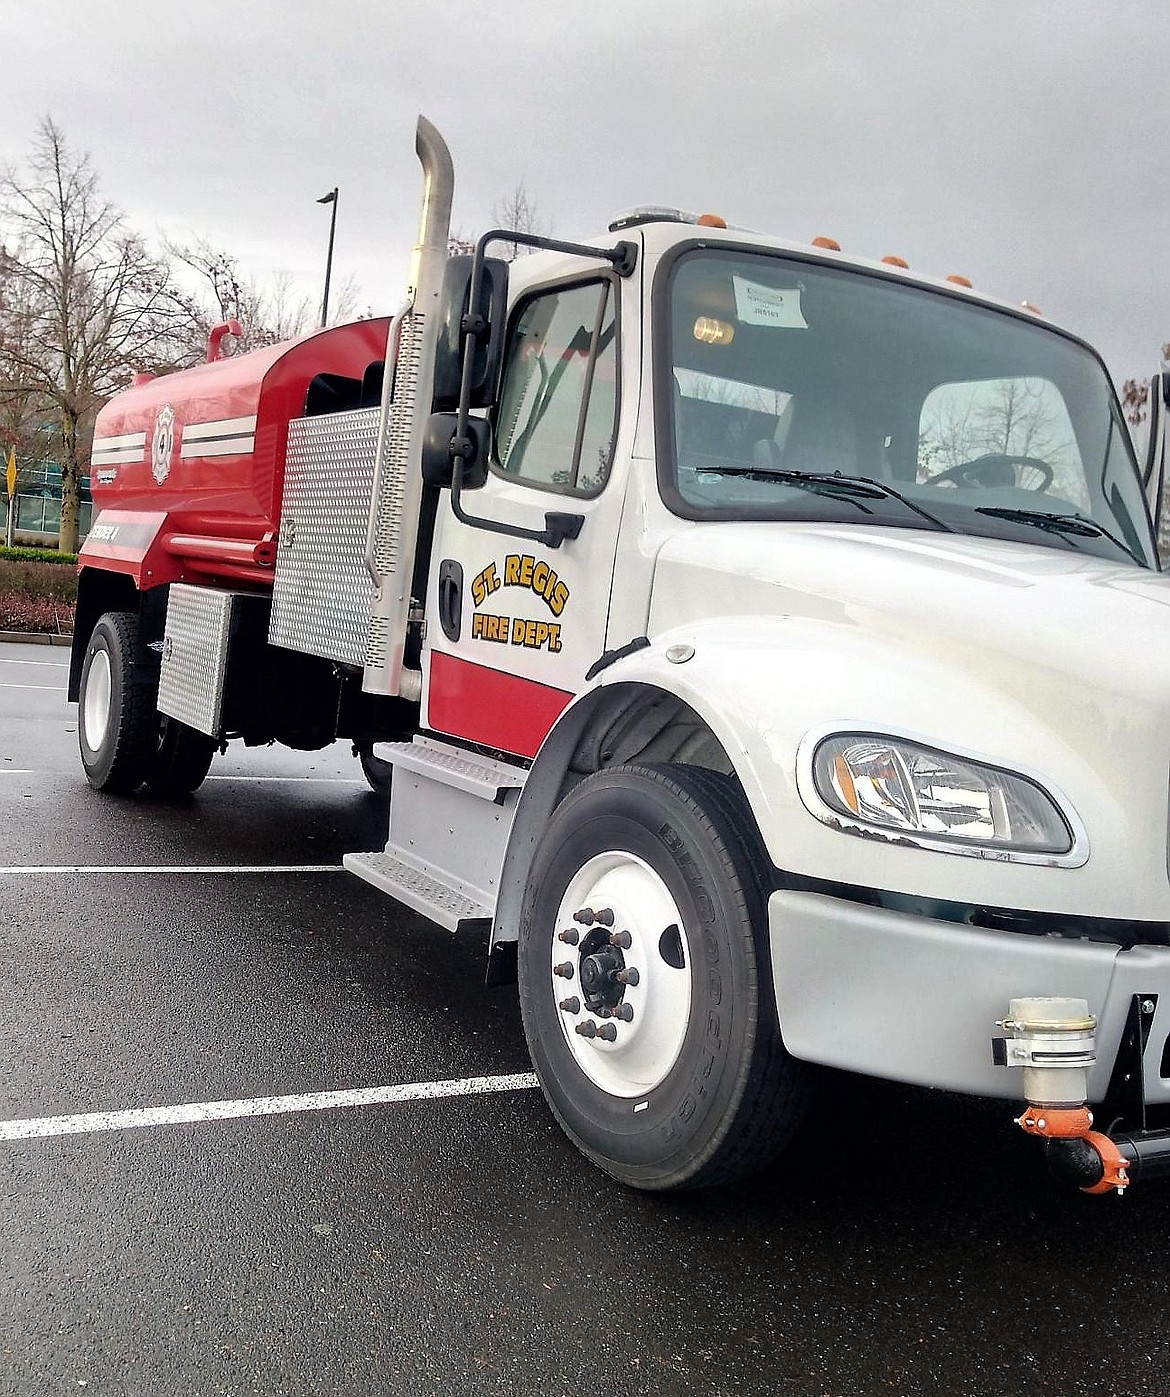 The St. Regis Volunteer Fire Department recently purchased a new water tender with funds earned fighting wildfires with the DNRC. (Photo courtesy of Kat Kittridge)